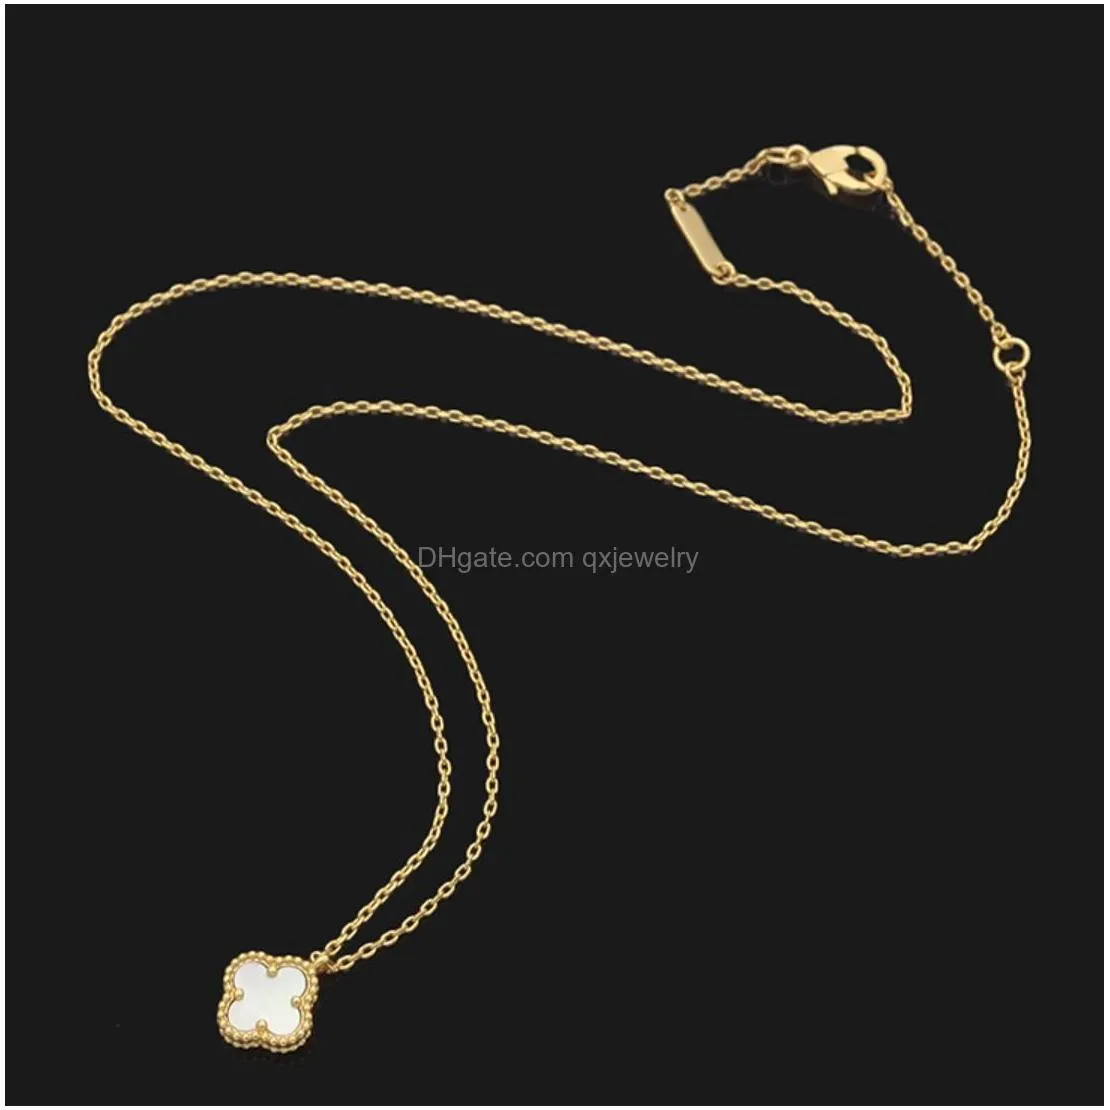 Pendant Necklaces Designer Mini Necklace Van Clover Fashion Design Charm 18K Gold Stainless Steel Luxury Jewelry Lovers Couple Gift La Dhe9B